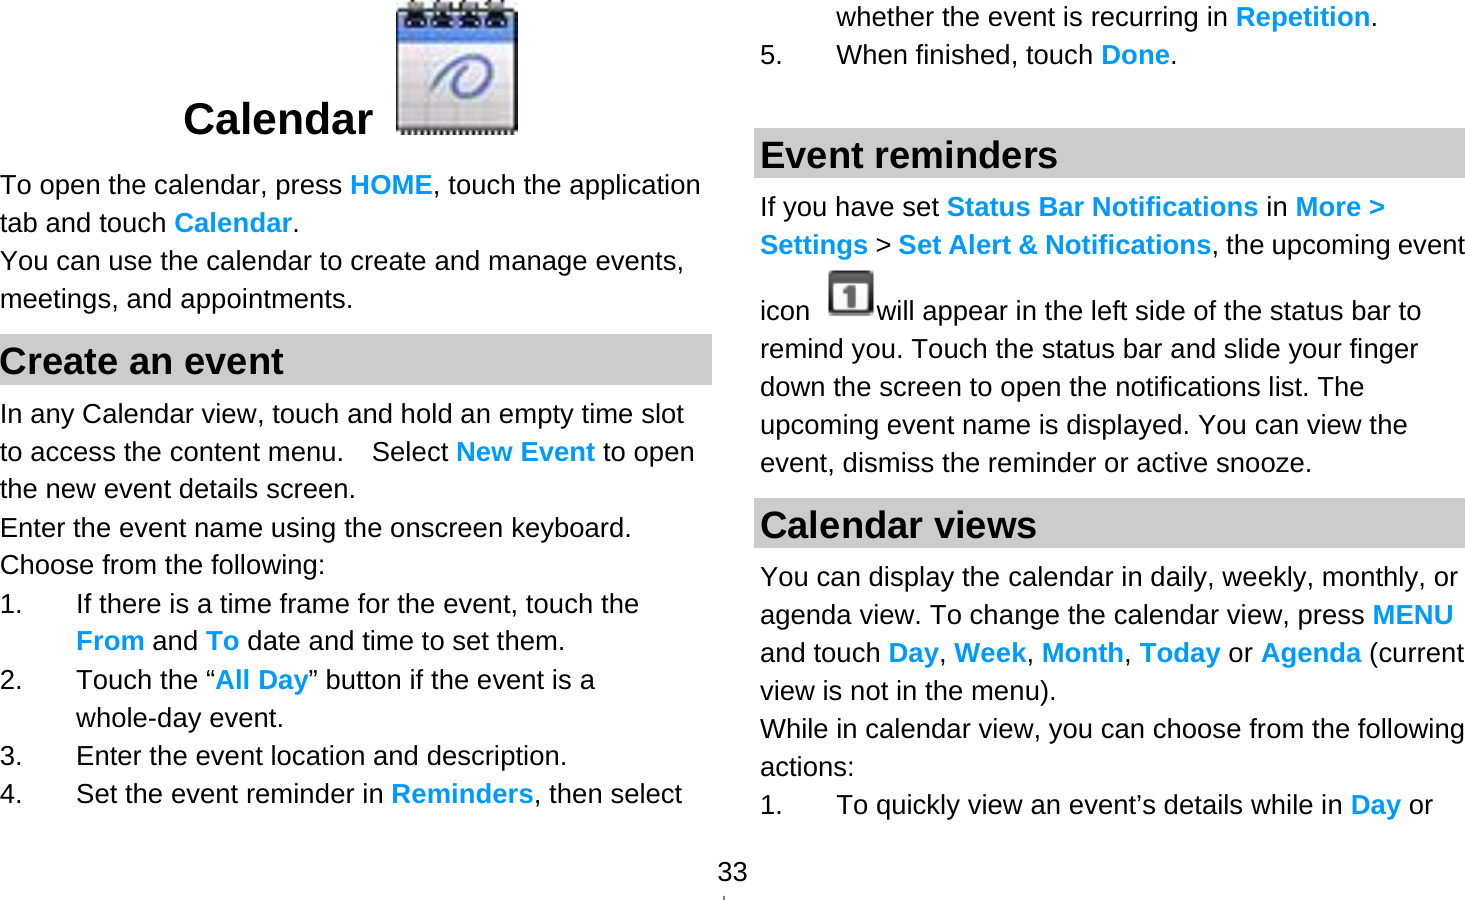   33 Calendar   To open the calendar, press HOME, touch the application tab and touch Calendar. You can use the calendar to create and manage events, meetings, and appointments.   Create an event In any Calendar view, touch and hold an empty time slot to access the content menu.    Select New Event to open the new event details screen. Enter the event name using the onscreen keyboard. Choose from the following: 1.  If there is a time frame for the event, touch the From and To date and time to set them. 2.  Touch the “All Day” button if the event is a whole-day event. 3.  Enter the event location and description. 4.  Set the event reminder in Reminders, then select whether the event is recurring in Repetition. 5.  When finished, touch Done.  Event reminders If you have set Status Bar Notifications in More &gt; Settings &gt; Set Alert &amp; Notifications, the upcoming event icon  will appear in the left side of the status bar to remind you. Touch the status bar and slide your finger down the screen to open the notifications list. The upcoming event name is displayed. You can view the event, dismiss the reminder or active snooze. Calendar views You can display the calendar in daily, weekly, monthly, or agenda view. To change the calendar view, press MENU and touch Day, Week, Month, Today or Agenda (current view is not in the menu). While in calendar view, you can choose from the following actions: 1.  To quickly view an event’s details while in Day or 